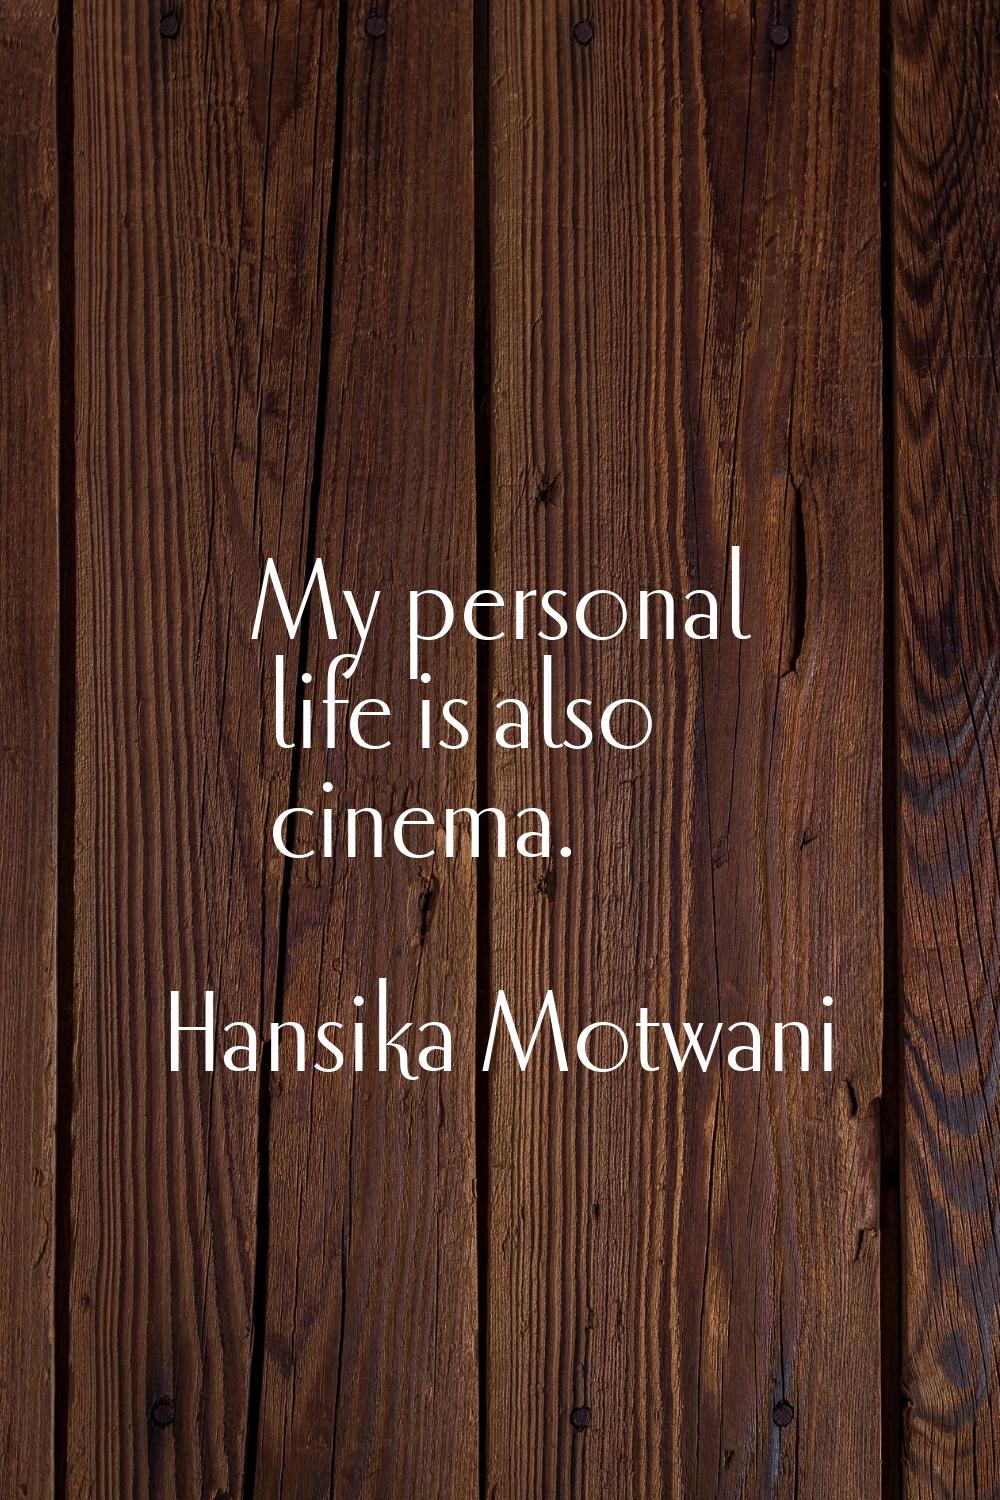 My personal life is also cinema.